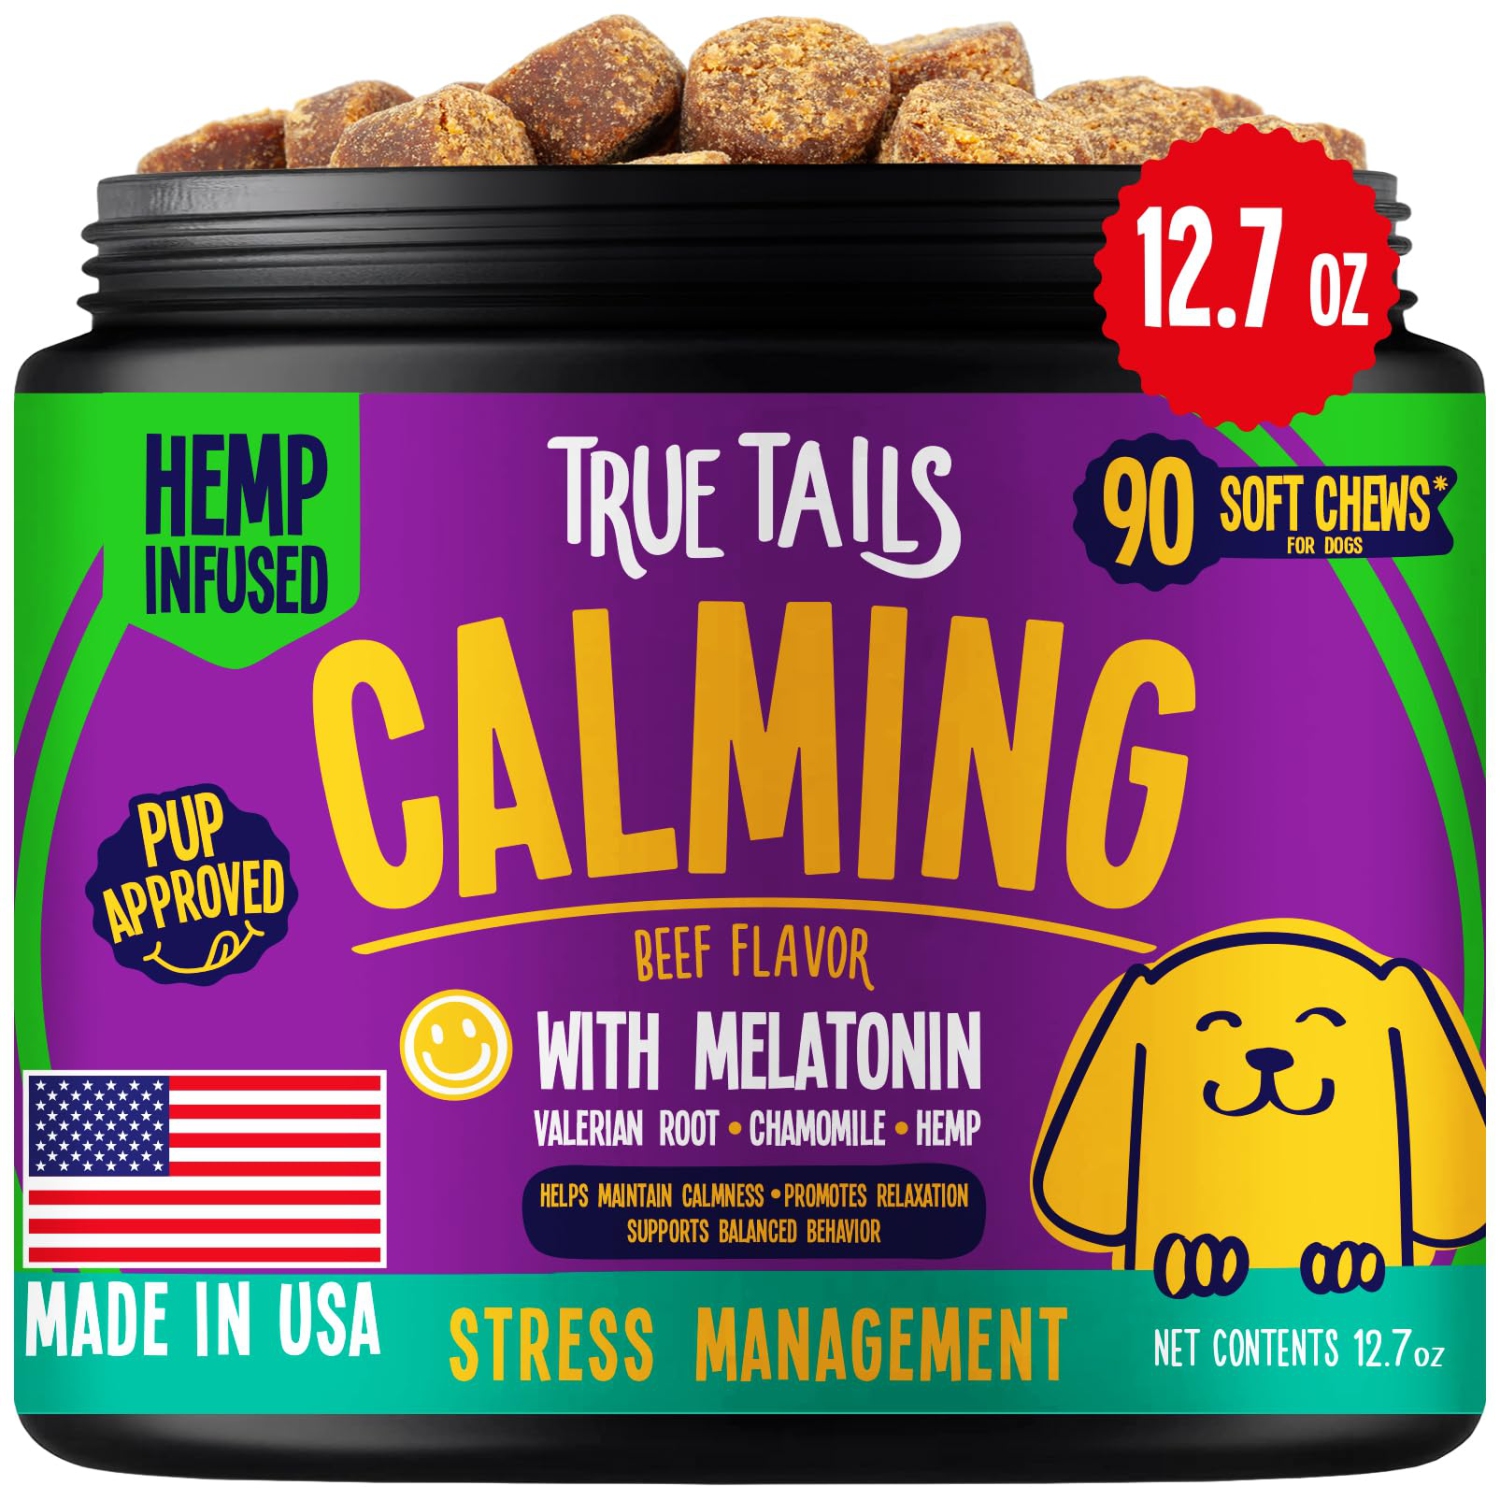 Dog Calming Chews - 90 Treats with Melatonin, Valerian Root, Hemp - Delicious and Relaxing - No Preservatives or Fillers - Beef Flavor